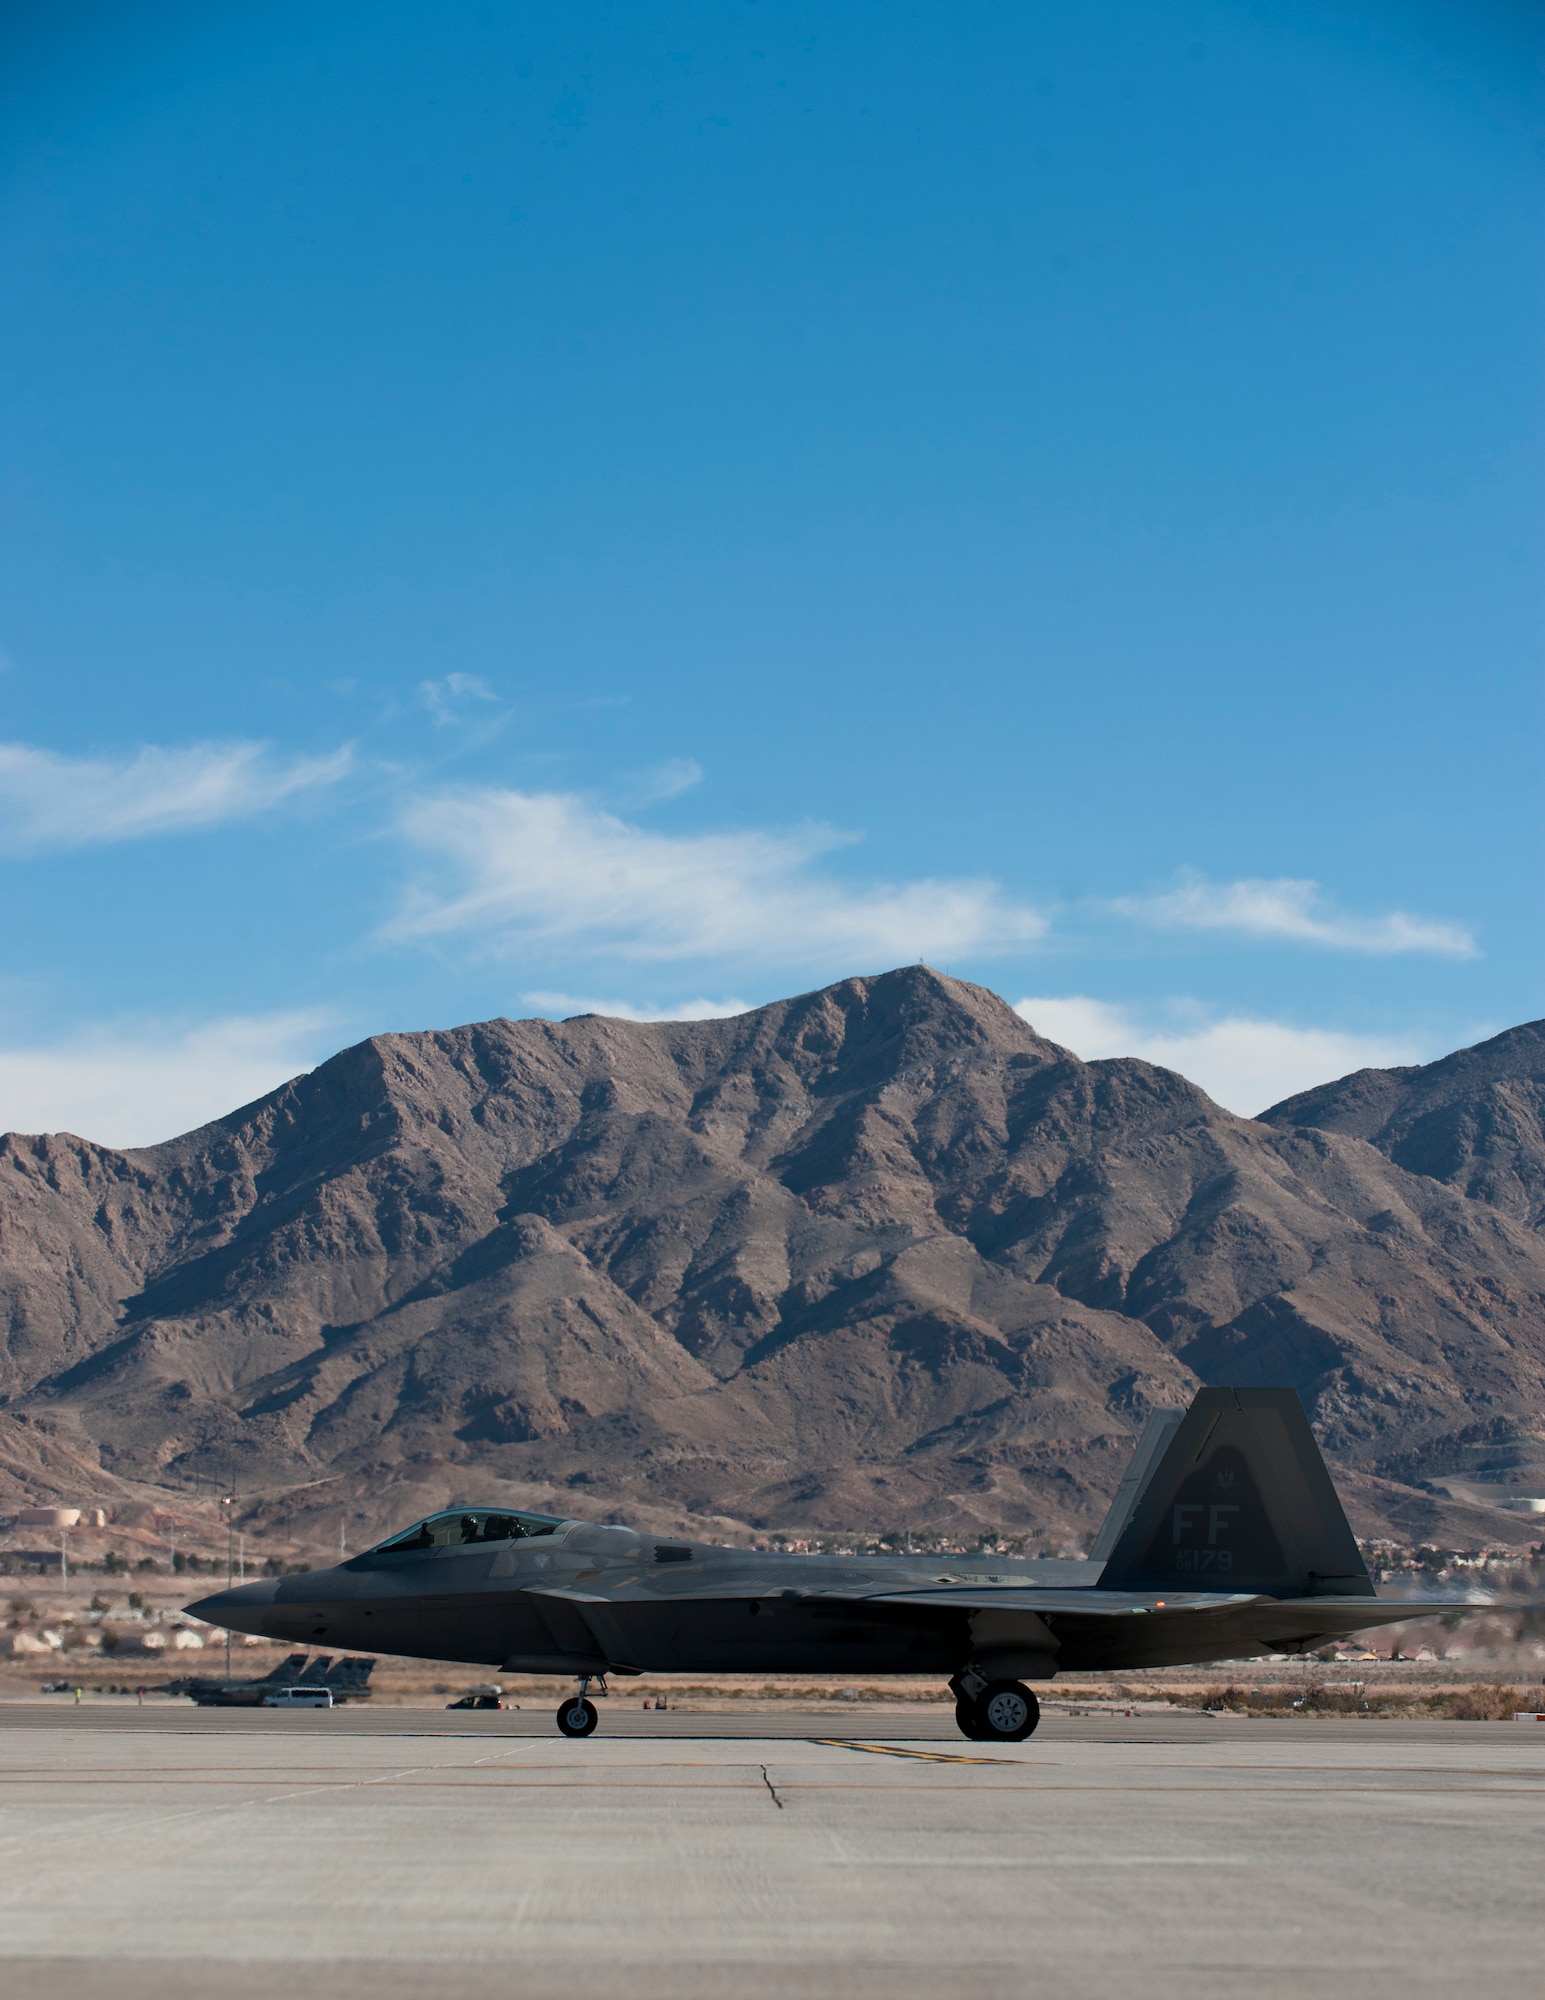 An F-22 Raptor assigned to the 94th Fighter Squadron, Joint Base Langley-Eustis, Va., taxis to the runway during Red Flag 15-1 at Nellis Air Force Base, Nev., Feb. 6, 2015. Red Flag provided combat training in a degraded and operationally limited environment making the training missions as realistic as possible. (U.S. Air Force photo by Senior Airman Thomas Spangler)